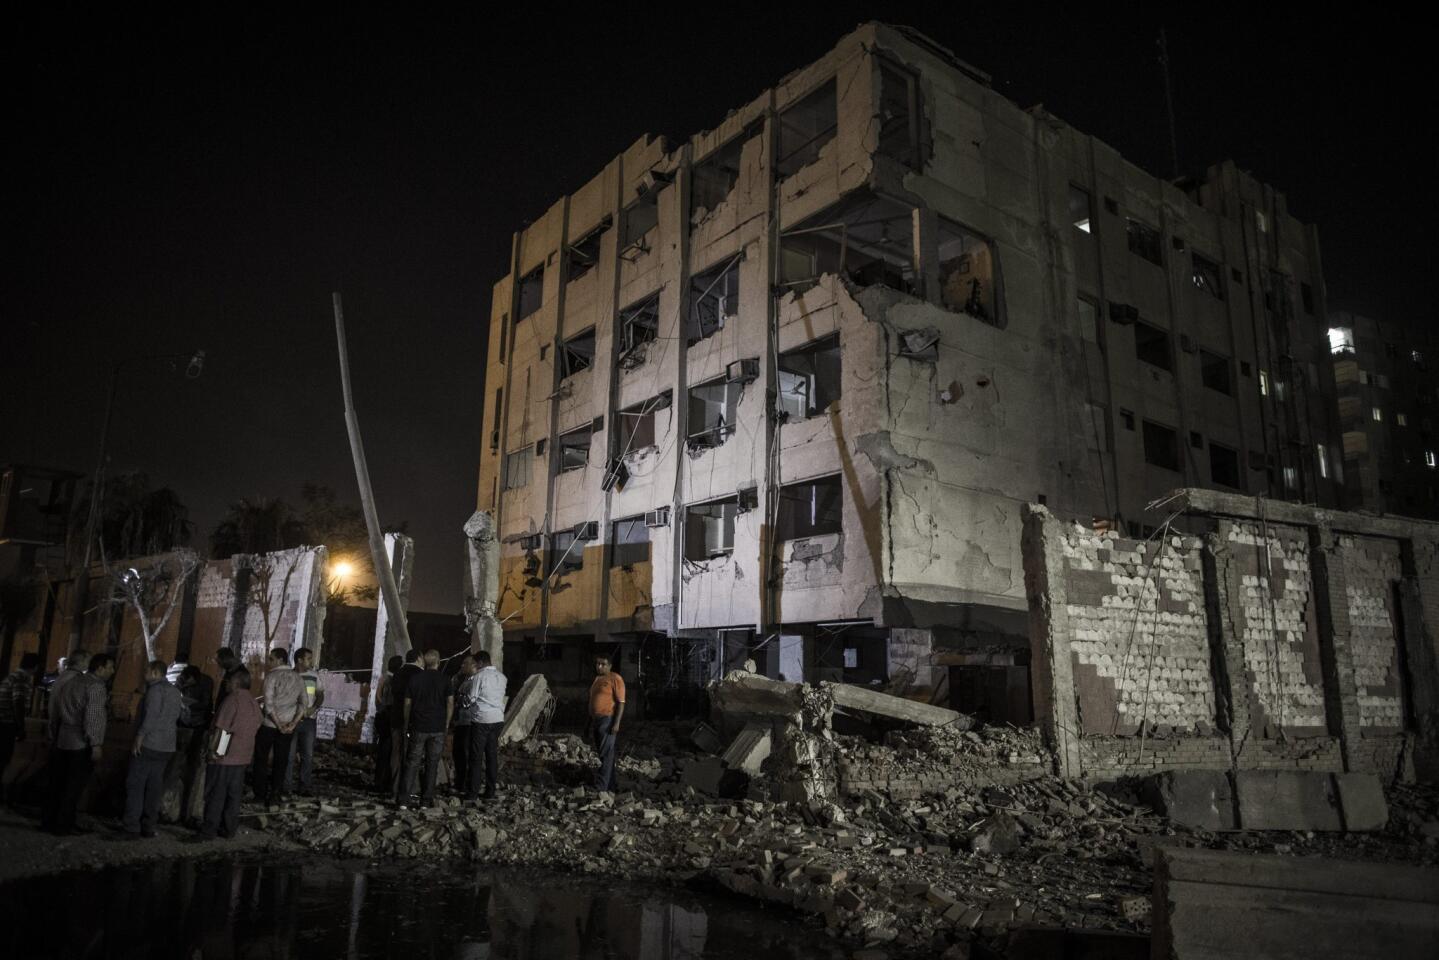 The scene where a bomb detonated next to a national security building in the Shubra neighborhood of Cairo, Egypt, early August 20, 2015.